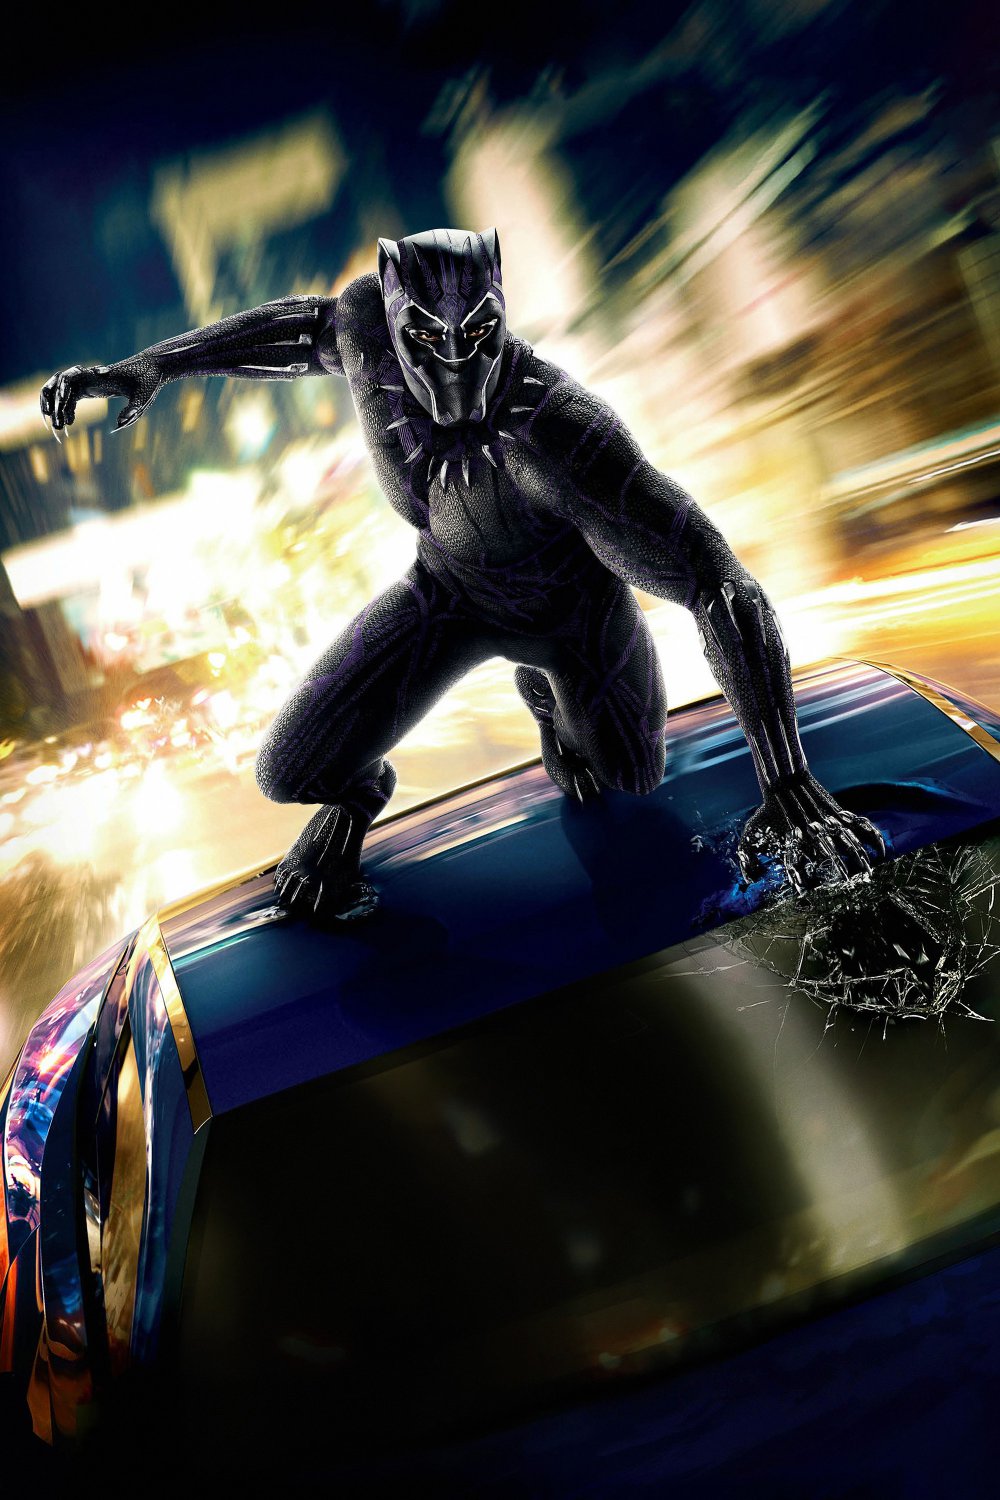 Black Panther 2018 Movie   13"x19" (32cm/49cm) Polyester Fabric Poster